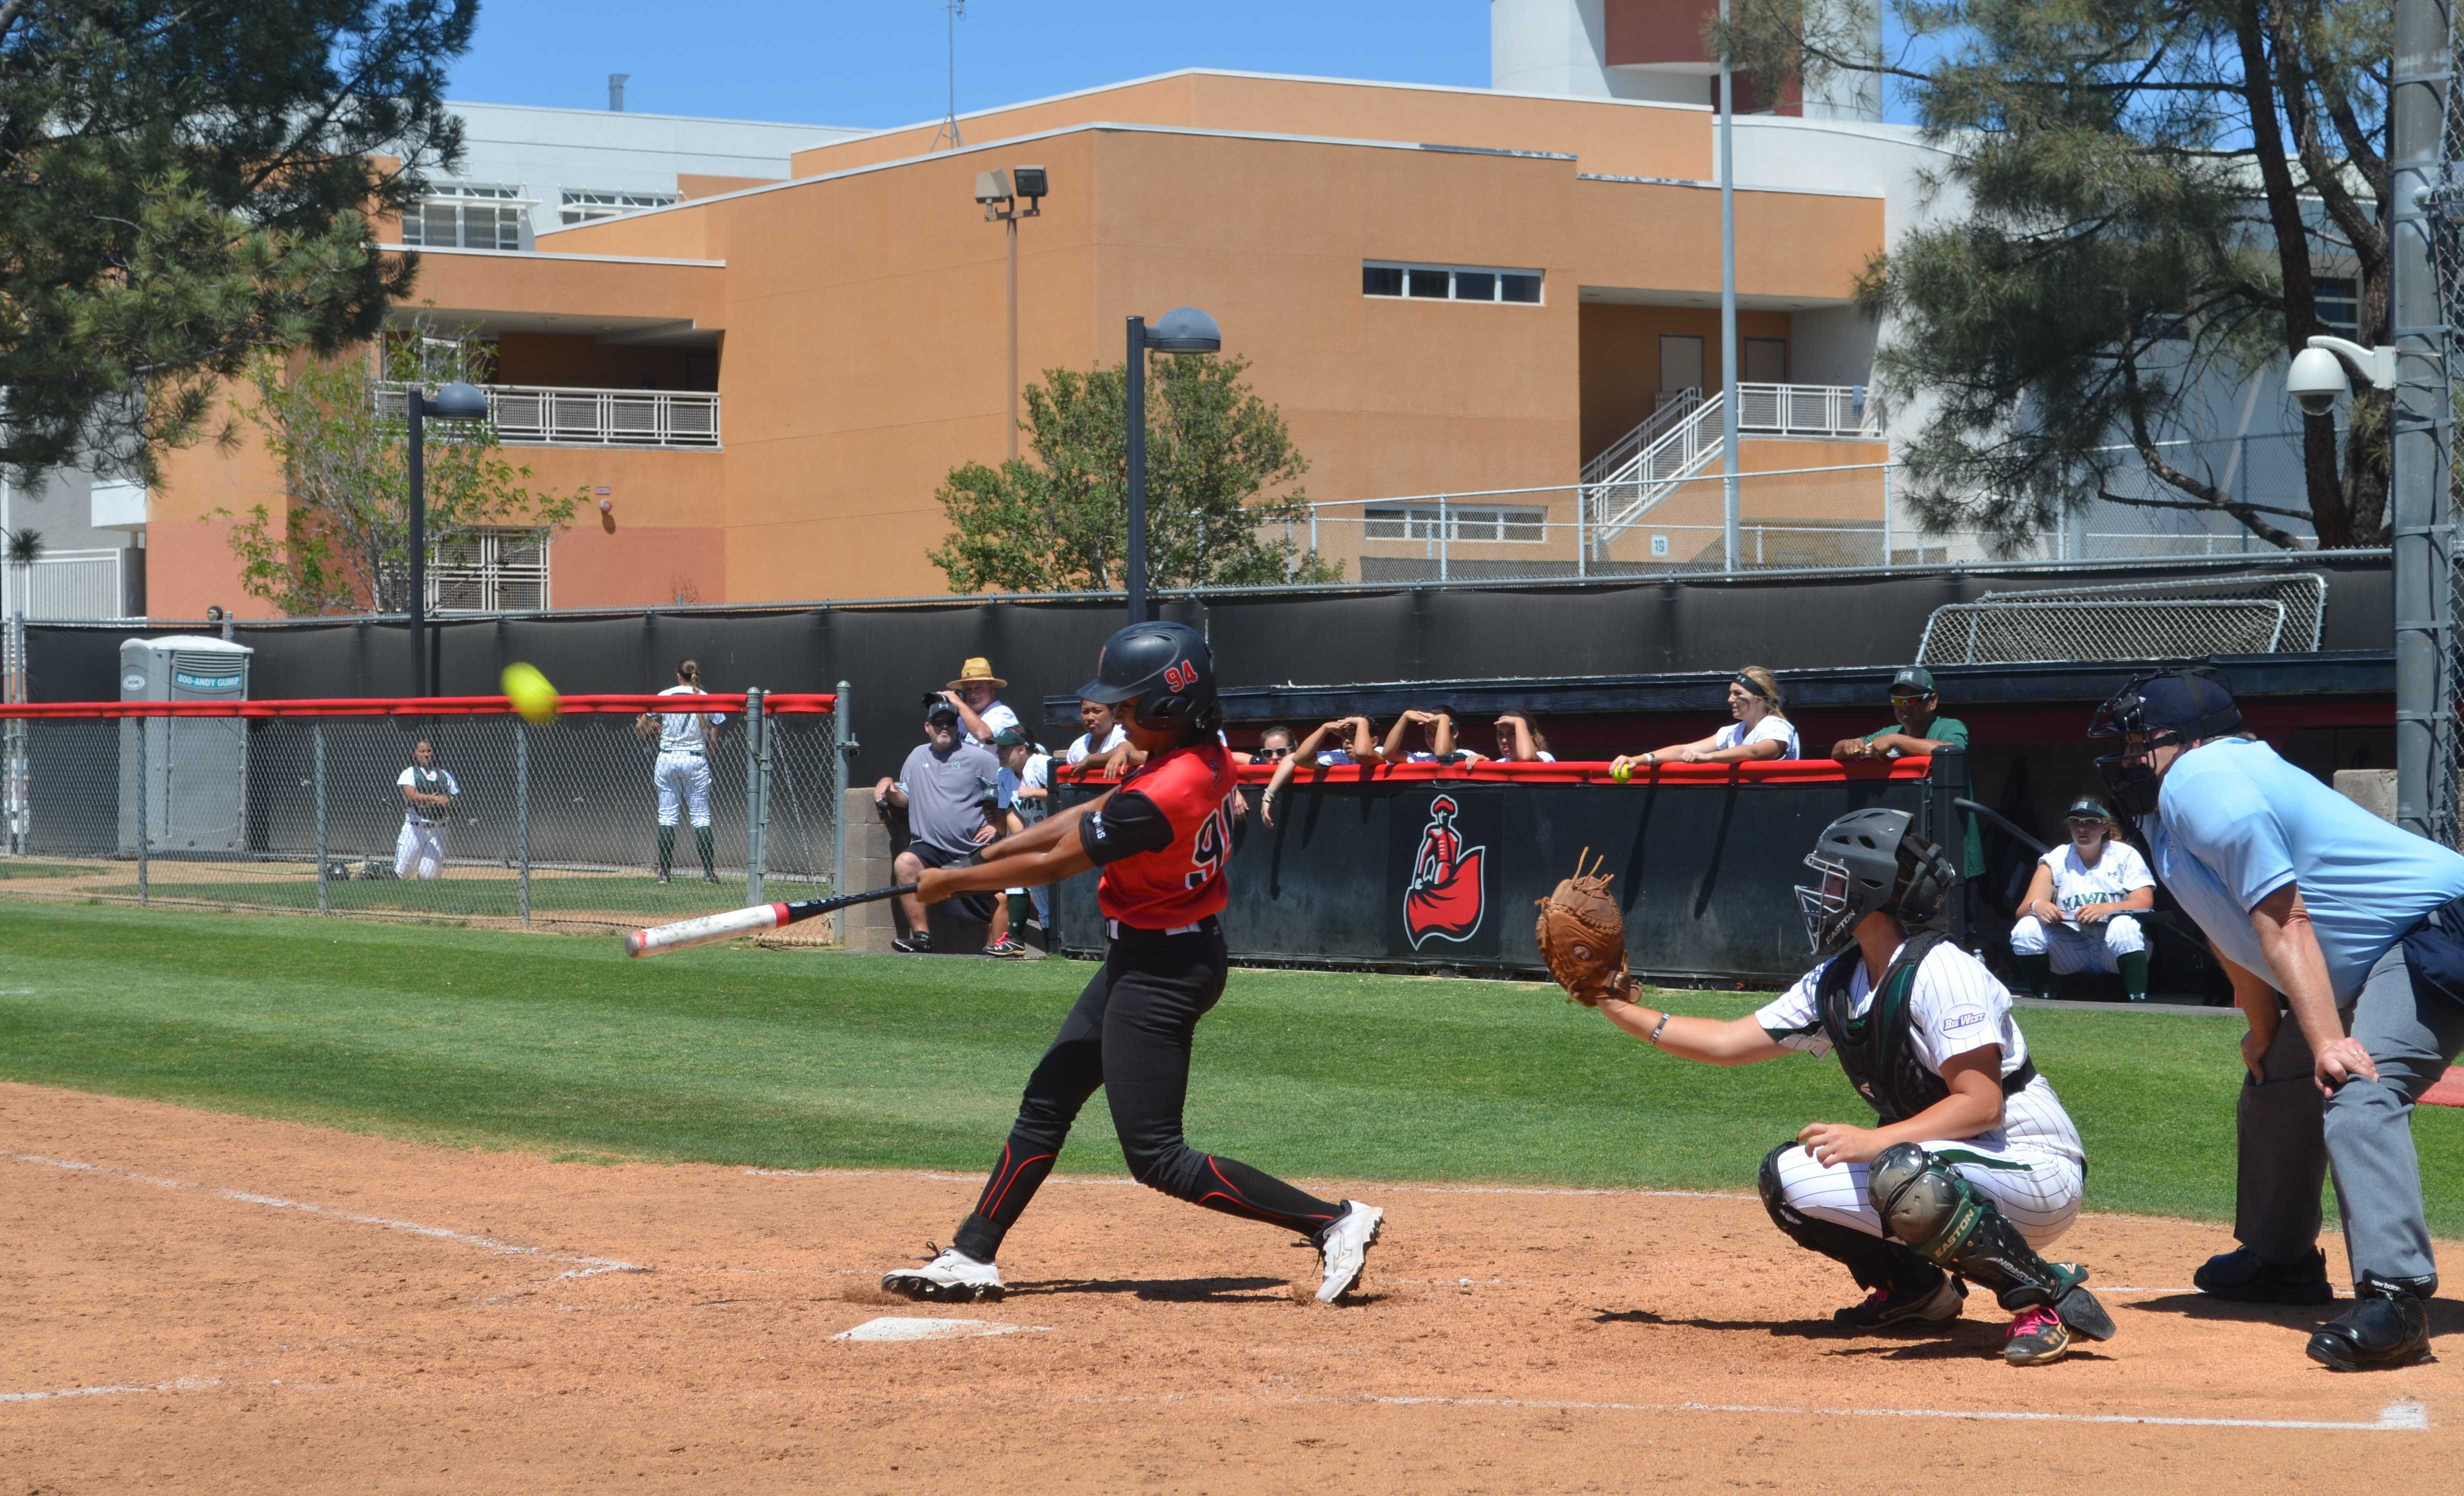 Junior Taylor Glover was three-for-four in the first game of CSUNs double header on Friday, Feb. 19, 2016. They lost the first game to Weber State, but won the second against Portland State. (File Photo / The Sundial)